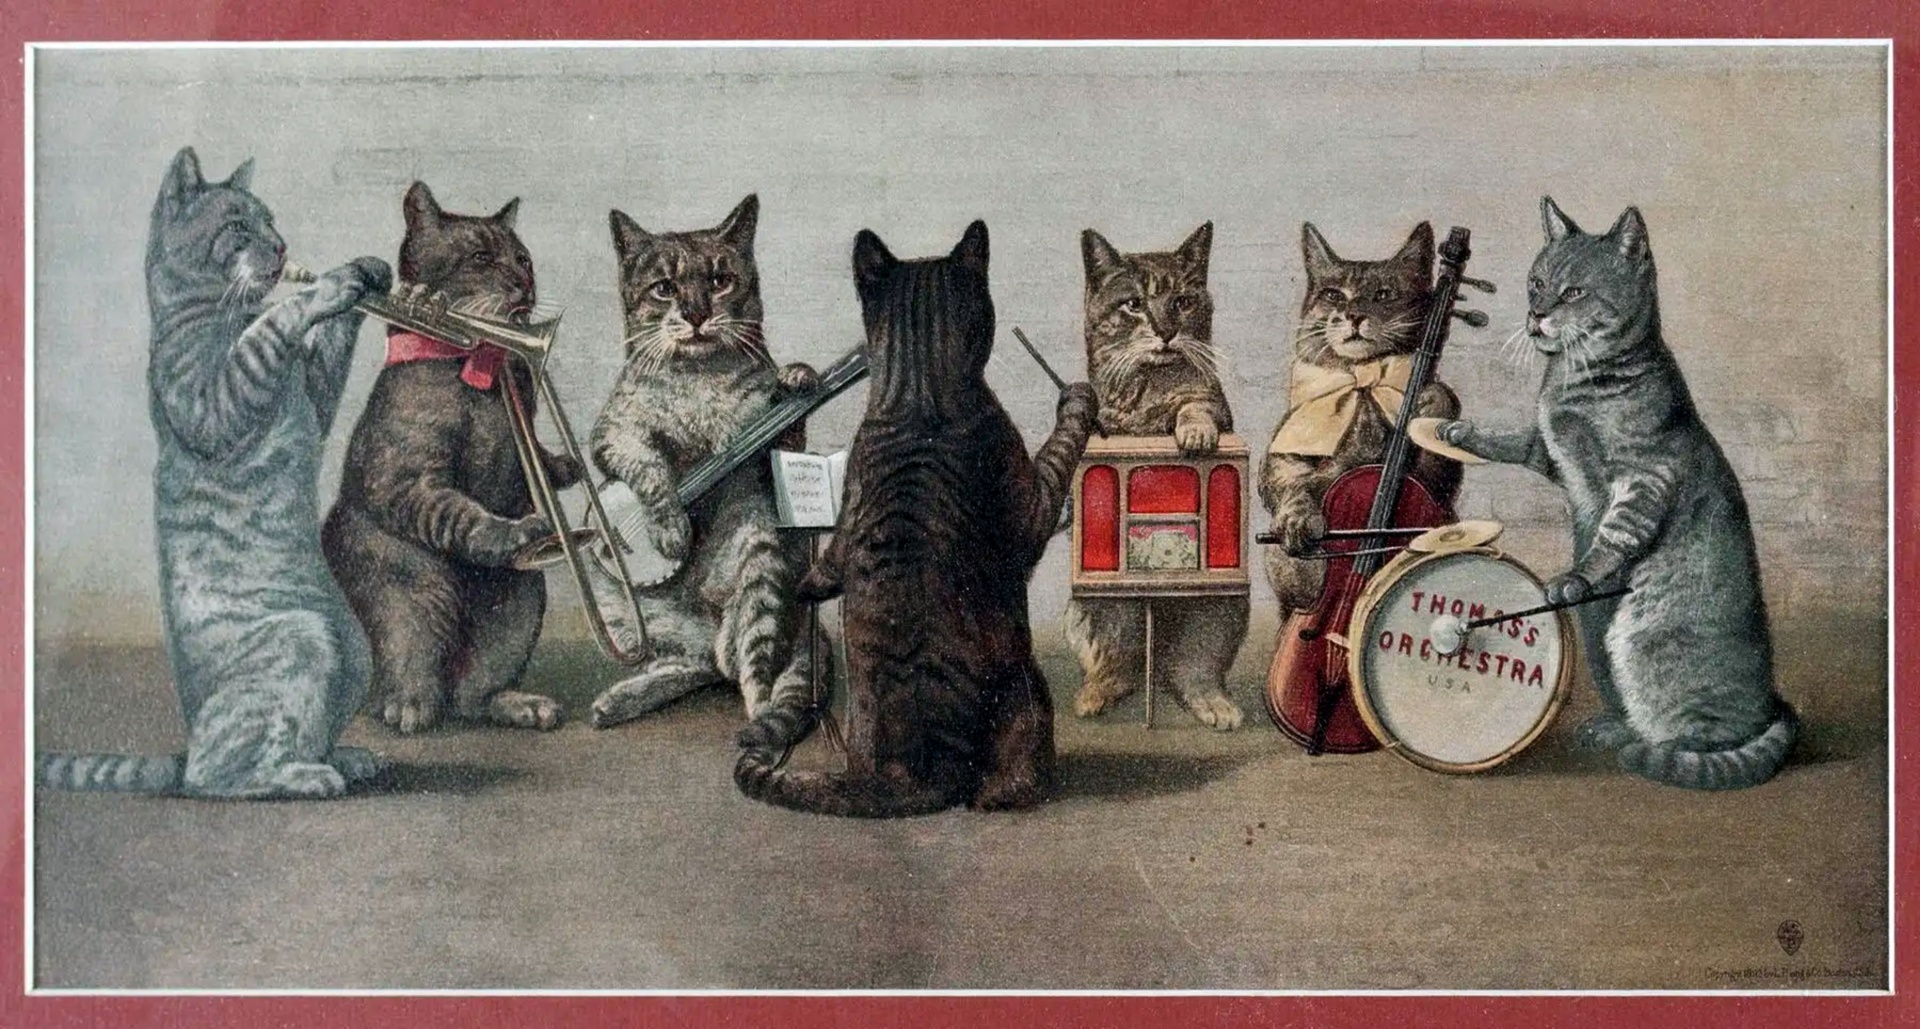 Vintage art paintings playing music cute cats kittens illustration old antique public domain